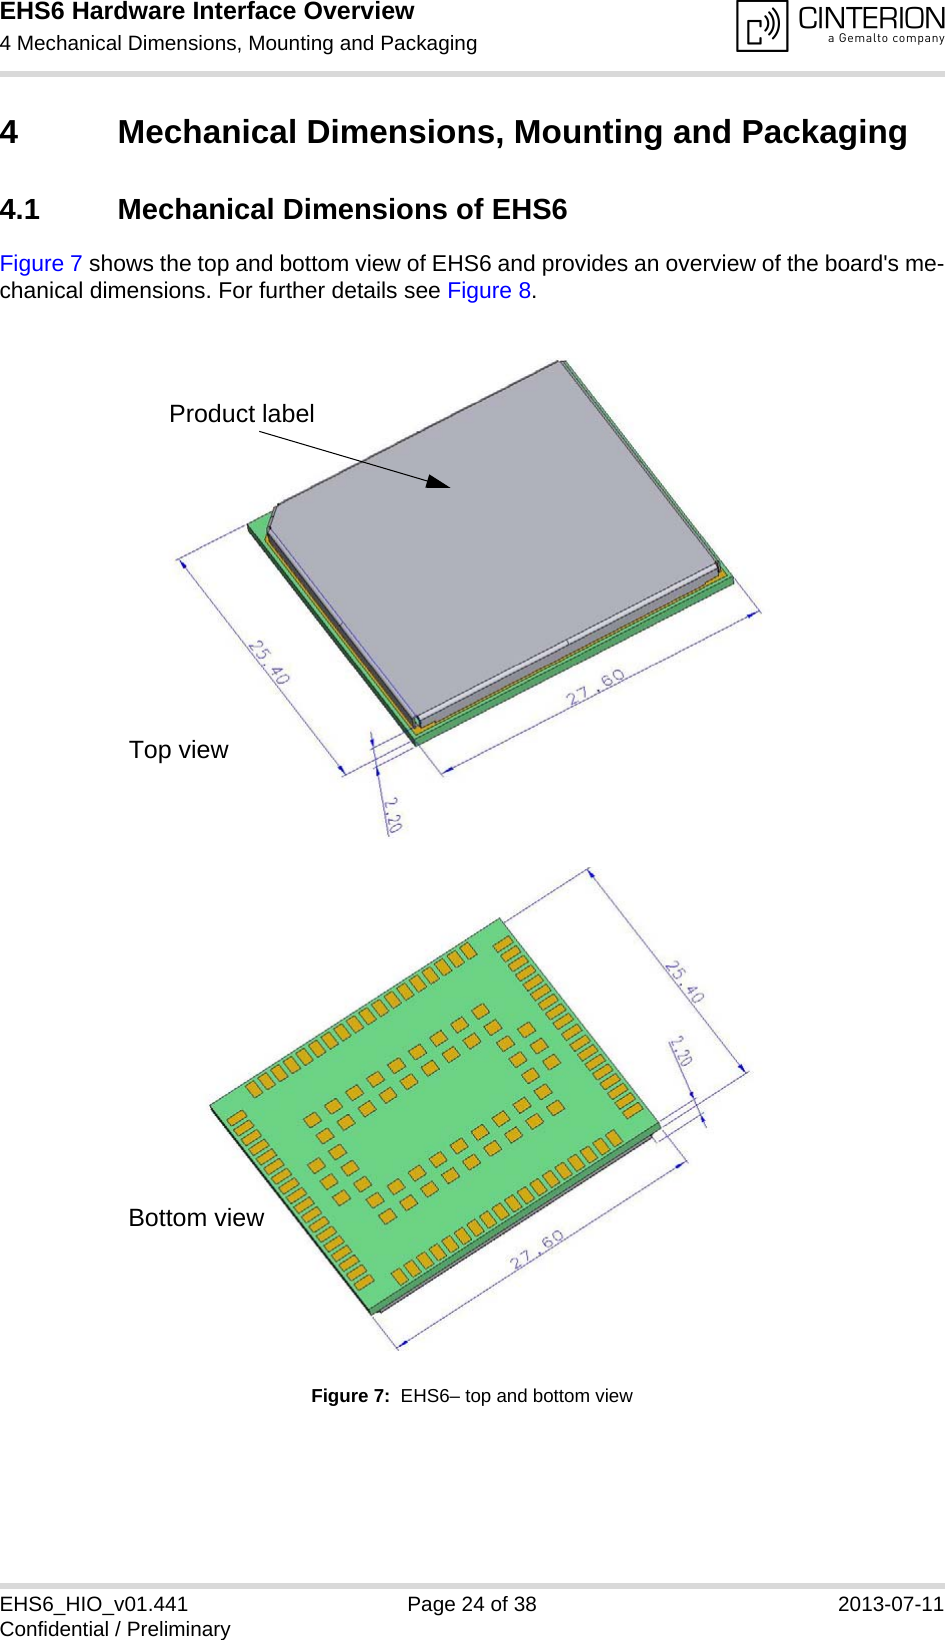 EHS6 Hardware Interface Overview4 Mechanical Dimensions, Mounting and Packaging25EHS6_HIO_v01.441 Page 24 of 38 2013-07-11Confidential / Preliminary4 Mechanical Dimensions, Mounting and Packaging4.1 Mechanical Dimensions of EHS6Figure 7 shows the top and bottom view of EHS6 and provides an overview of the board&apos;s me-chanical dimensions. For further details see Figure 8. Figure 7:  EHS6– top and bottom viewProduct labelTop viewBottom view